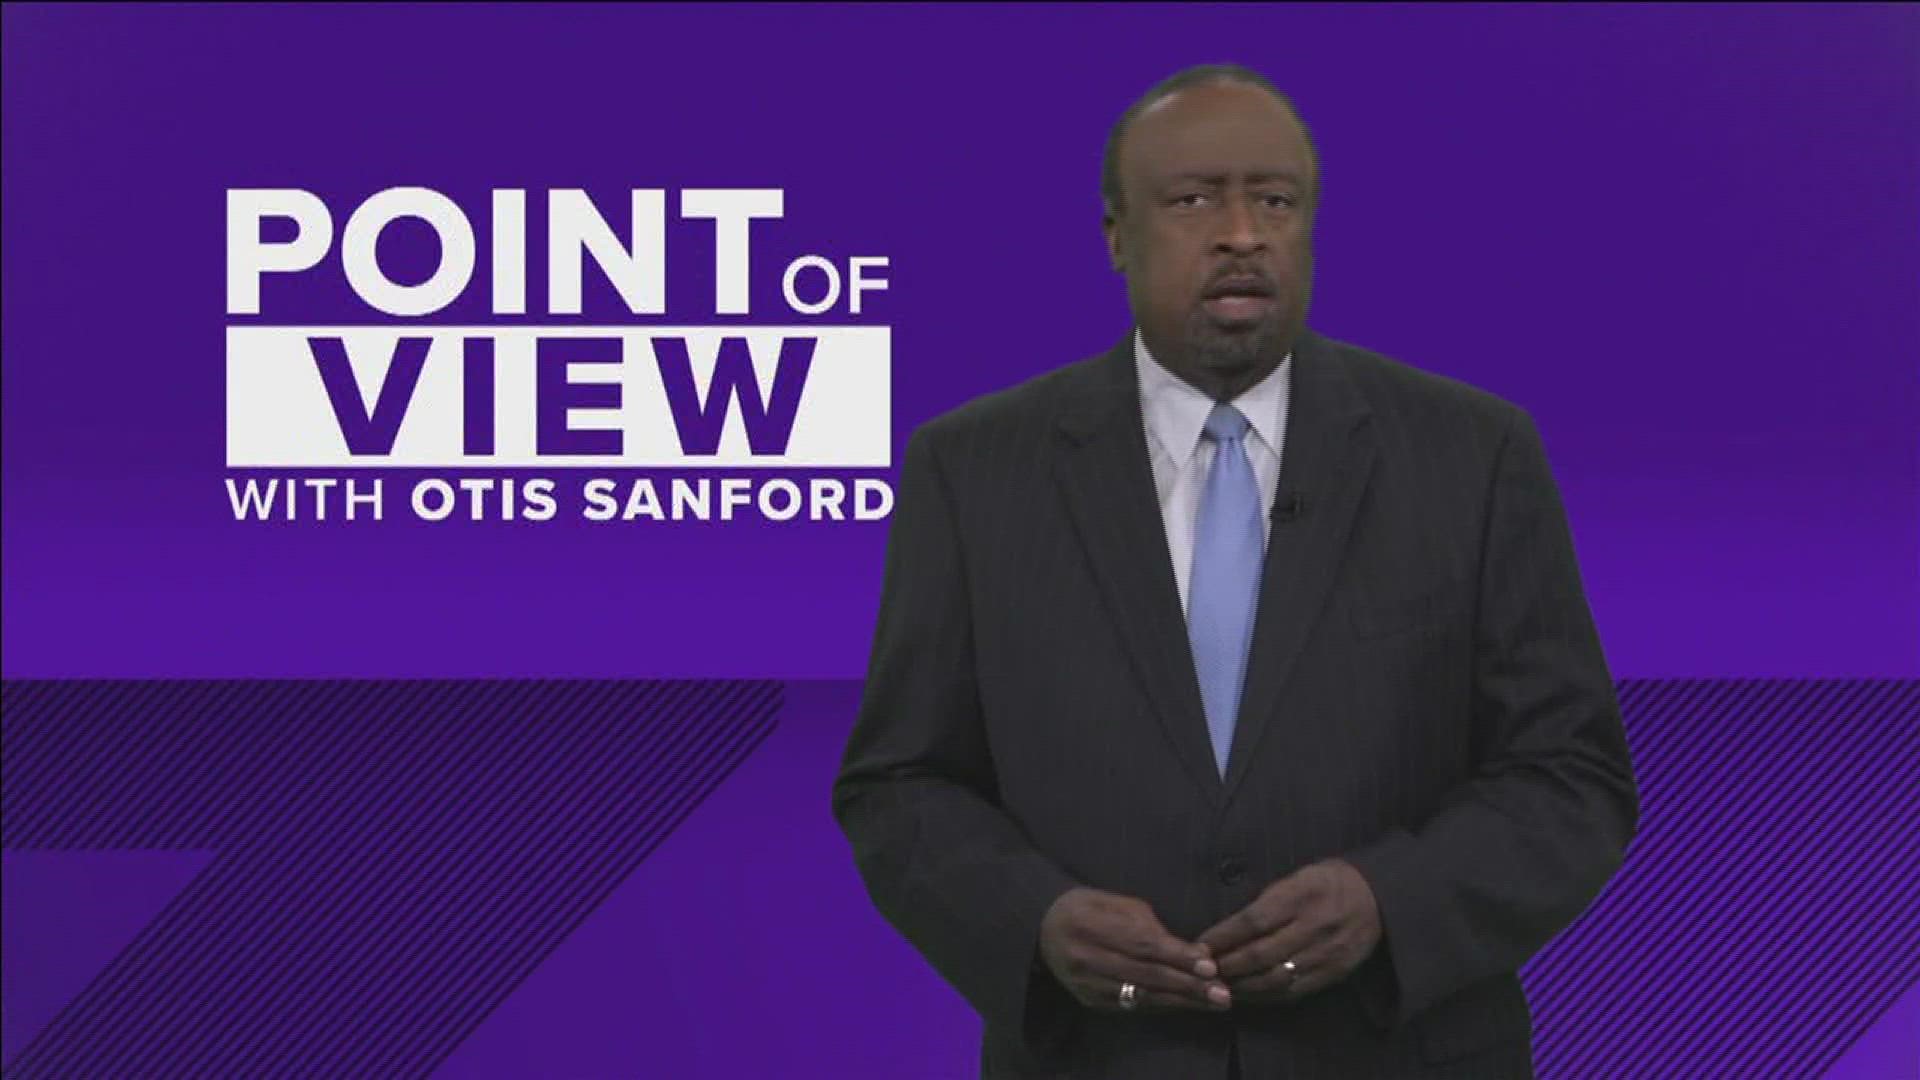 Otis Sanford gives his point of view on why he thinks Tennessee government needs to do a better job of caring for kids under DCS custody.